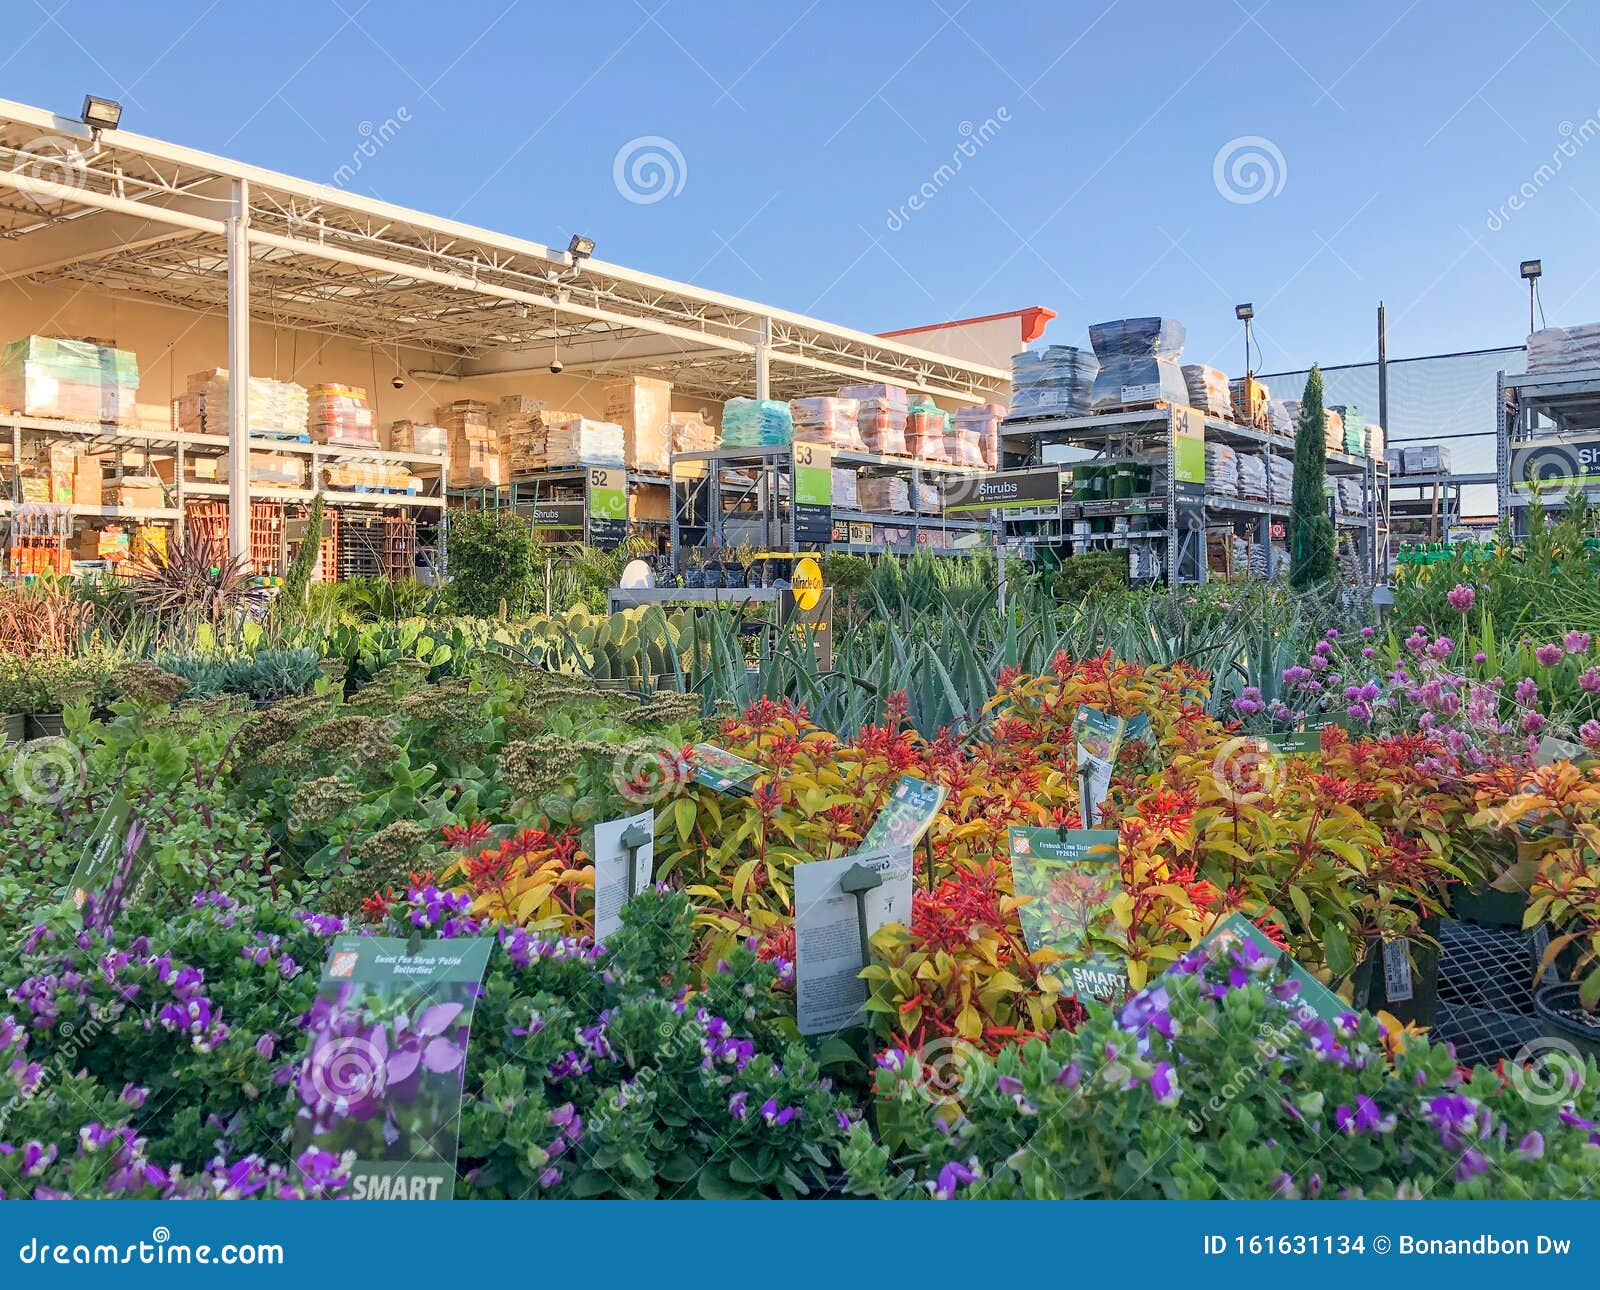 Colorful Flowers And Plants For Sale At Nursery Editorial Stock Image Image Of Floral Cultivation